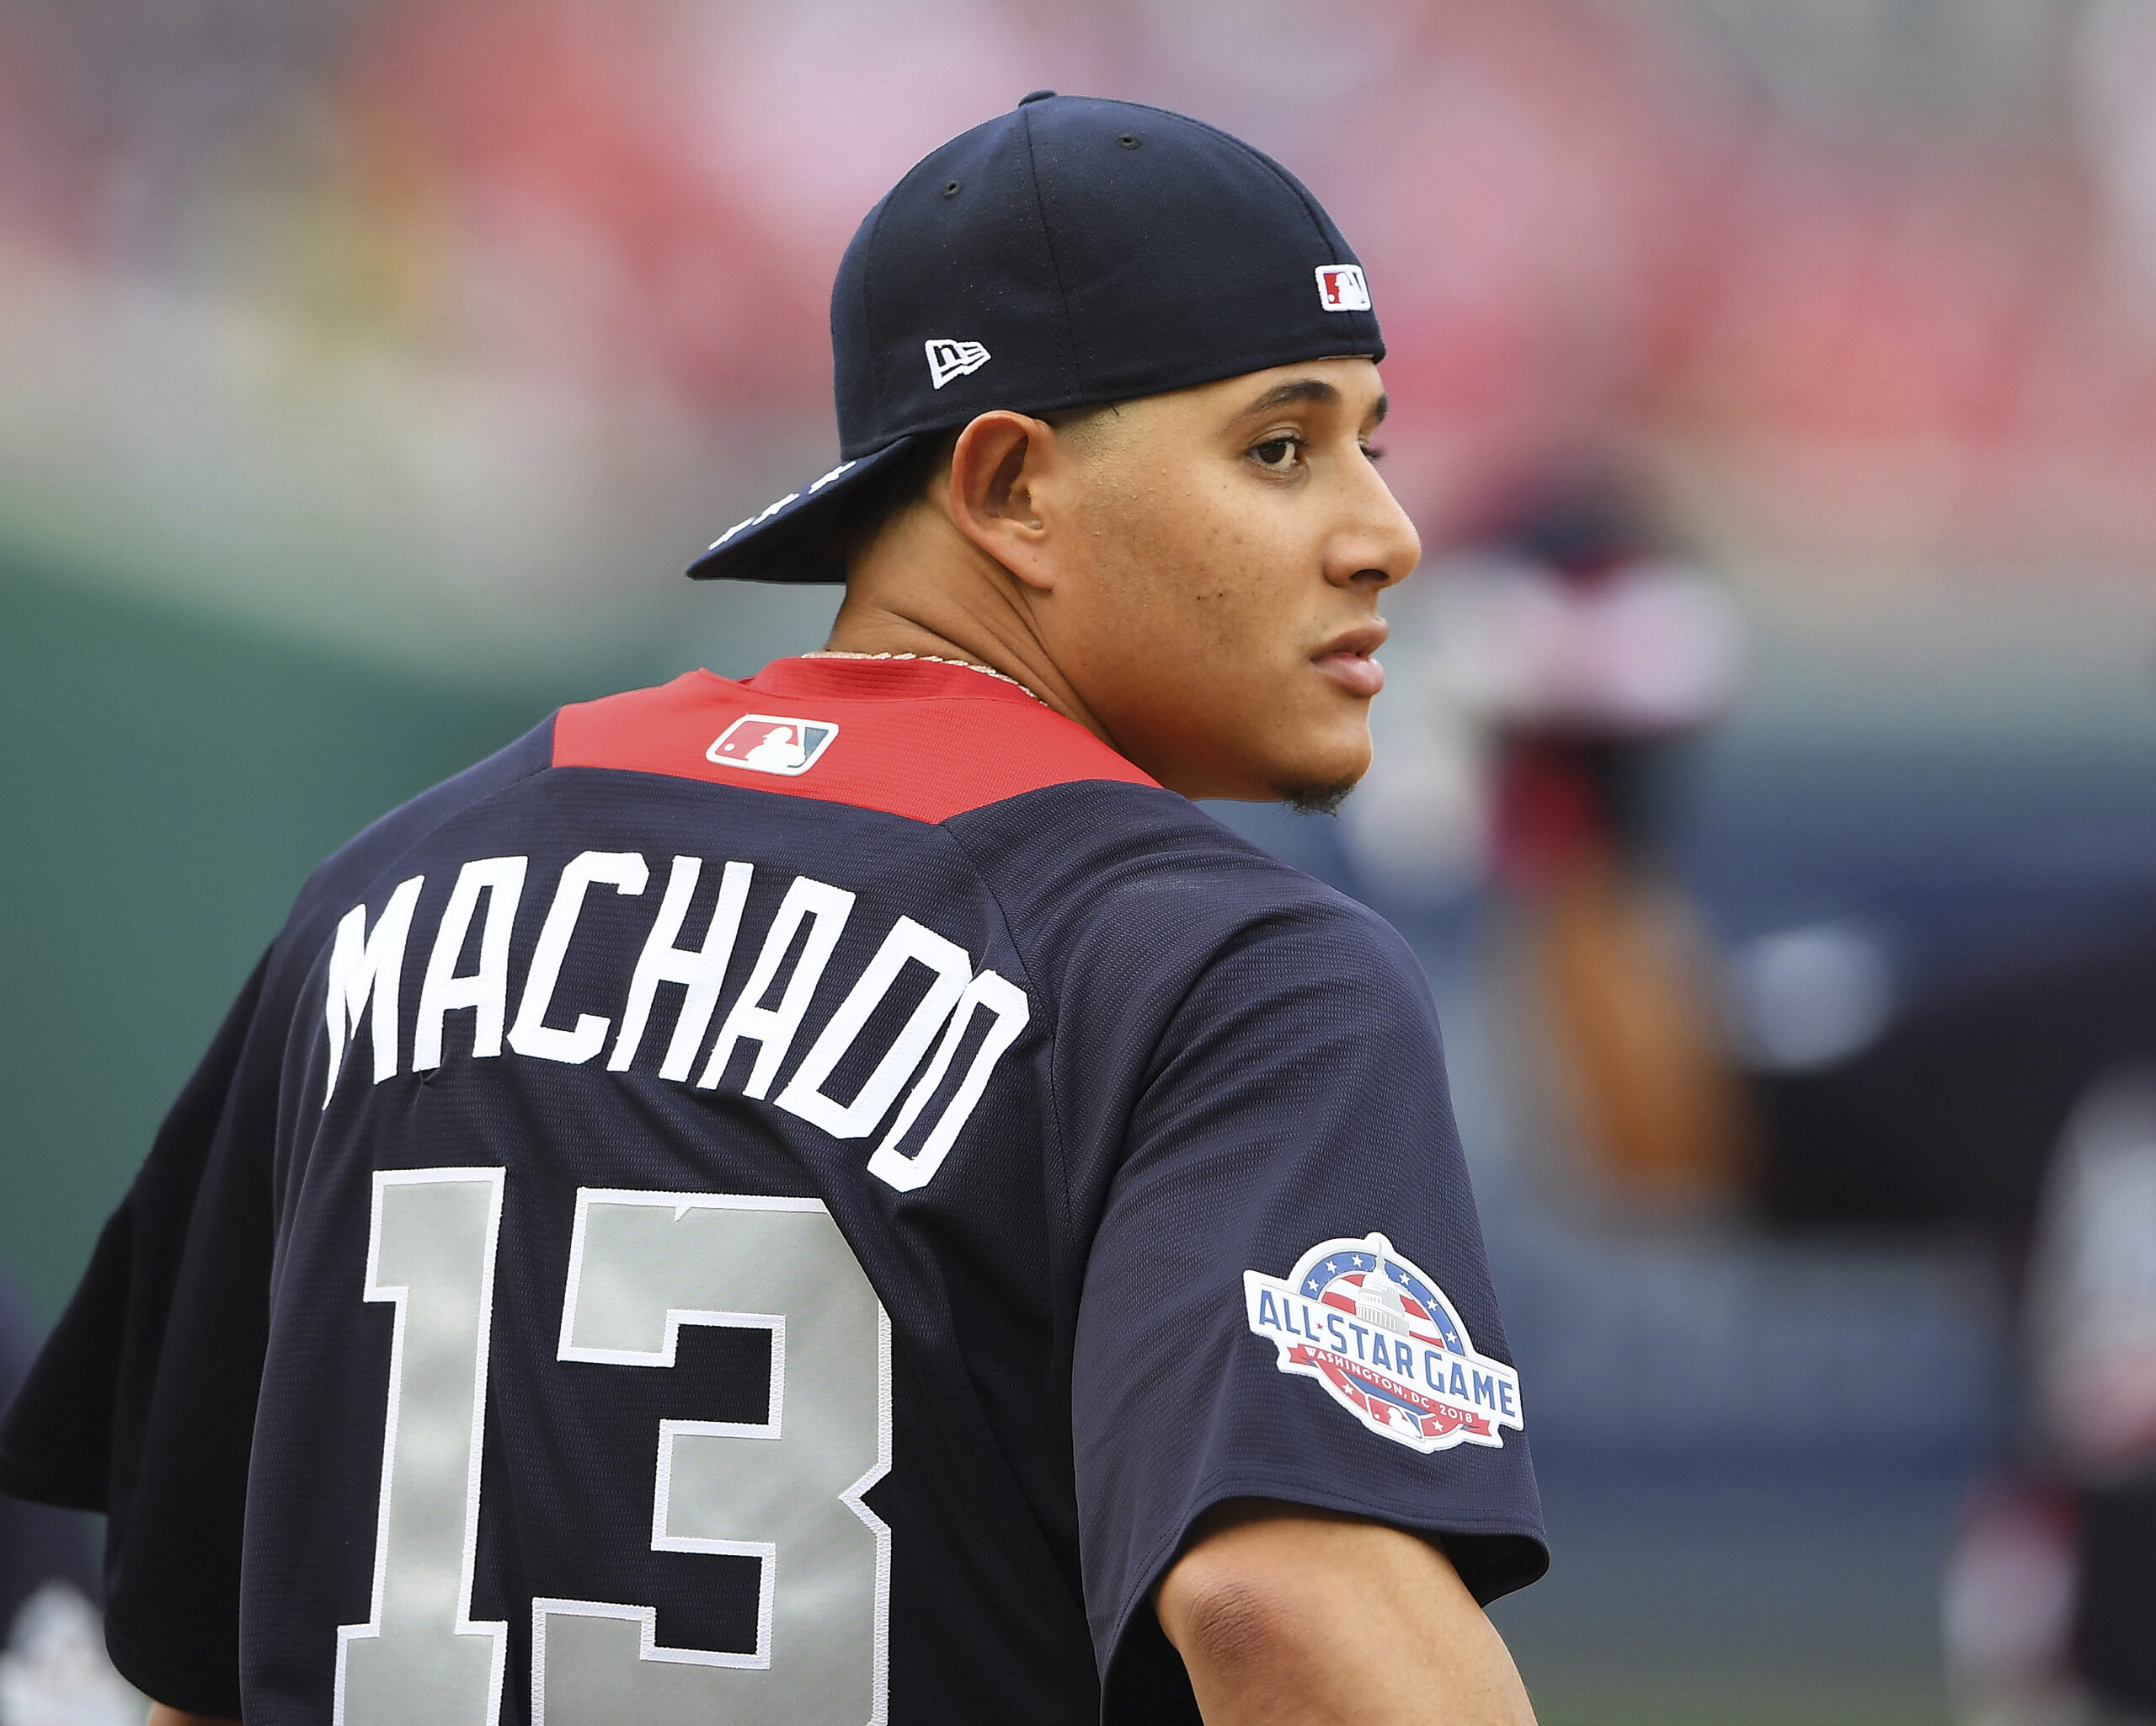 What is Manny Machado salary?